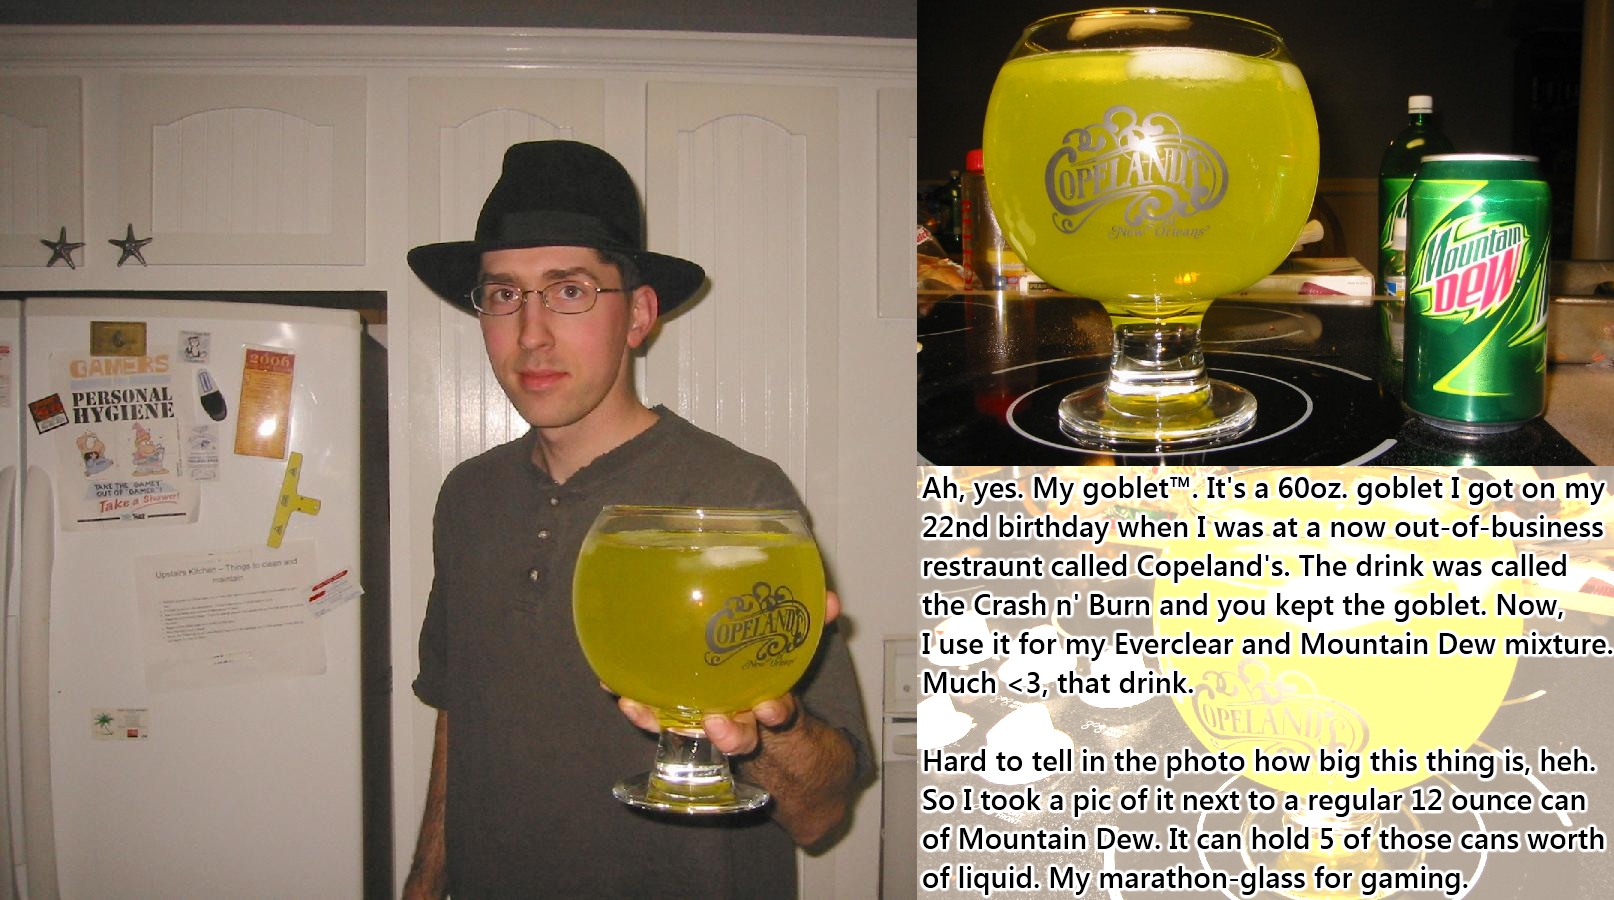 mountain dew goblet - Ah, yes. My goblet". It's a 60oz. goblet I got on my 22nd birthday when I was at a now outofbusiness restraunt called Copeland's. The drink was called the Crash n' Burn and you kept the goblet. Now, I use it for my Everclear and Moun